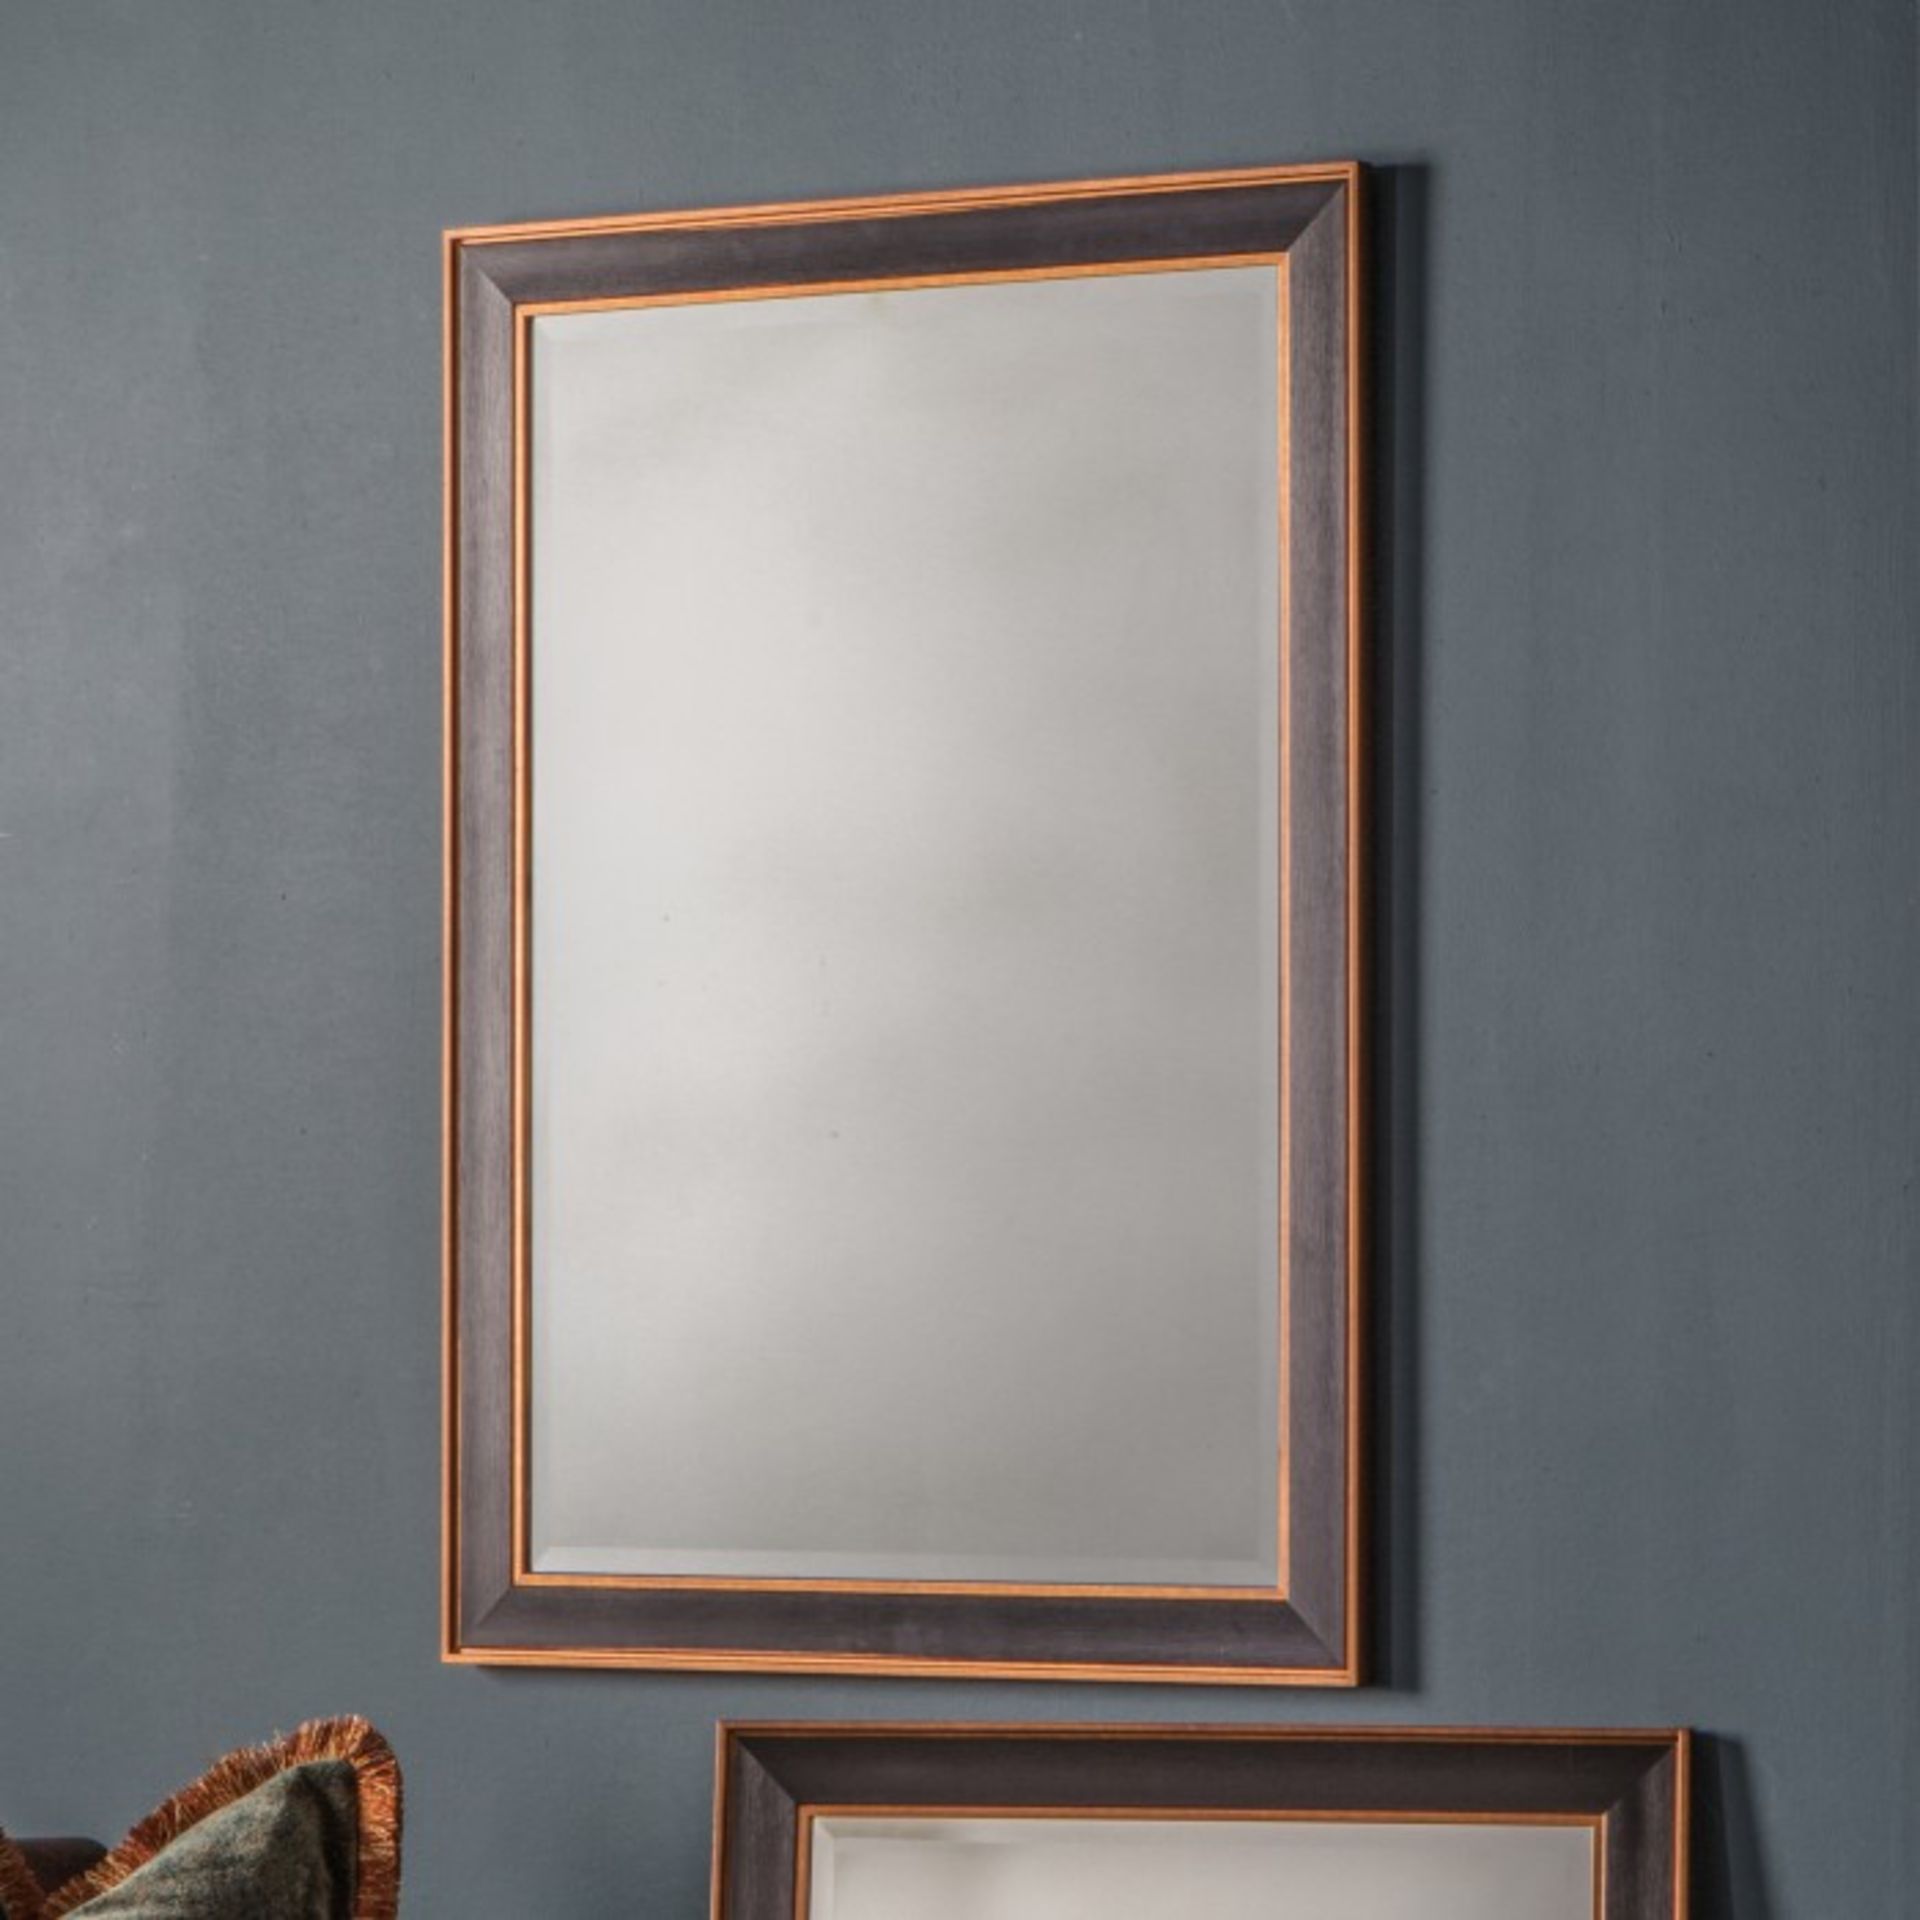 Daltry Mirror Black Bring Style To Your Space With The Daltry Mirror Black Large This Piece Is